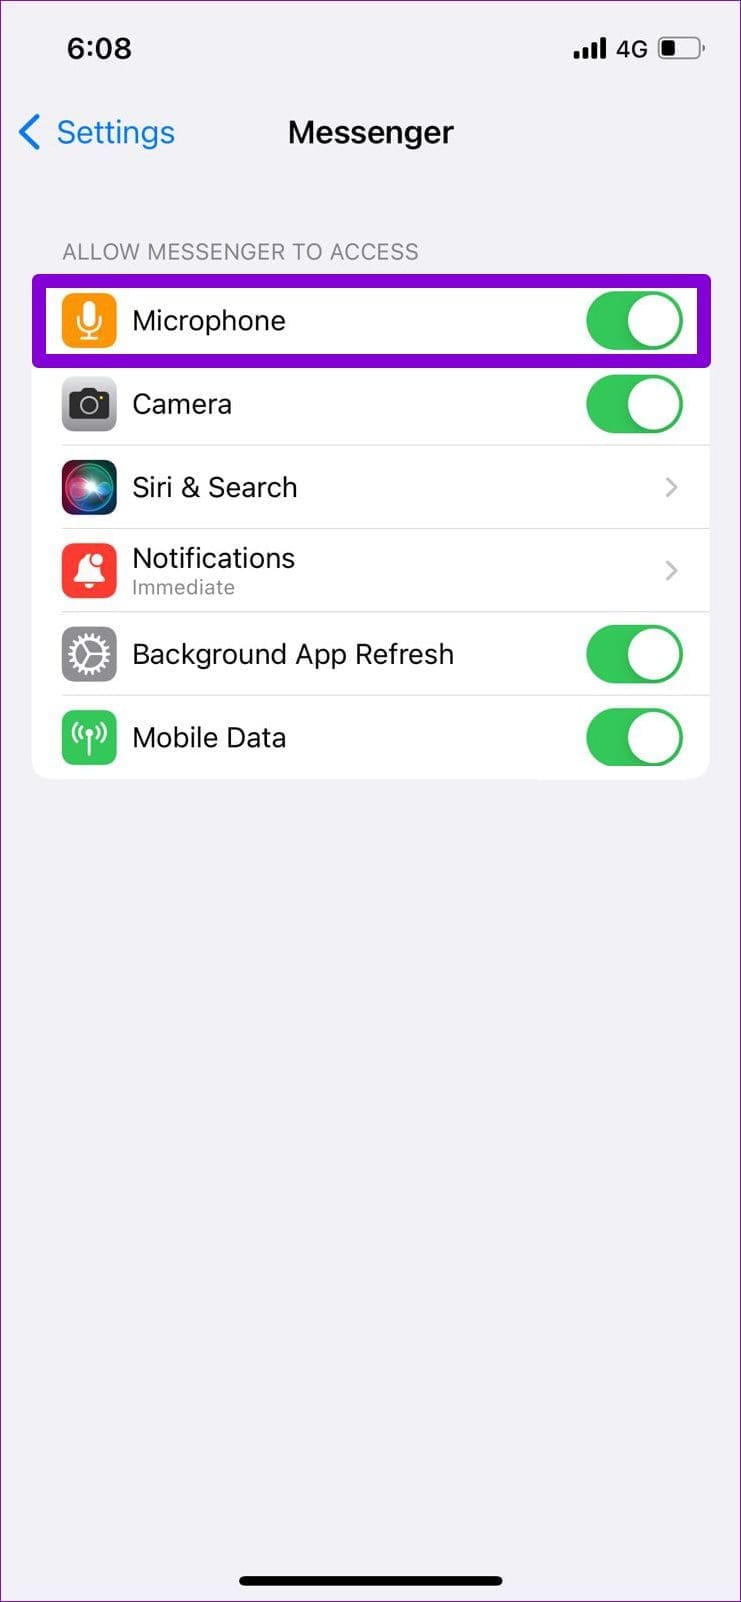 Enable Microphone for Messenger on iPhone